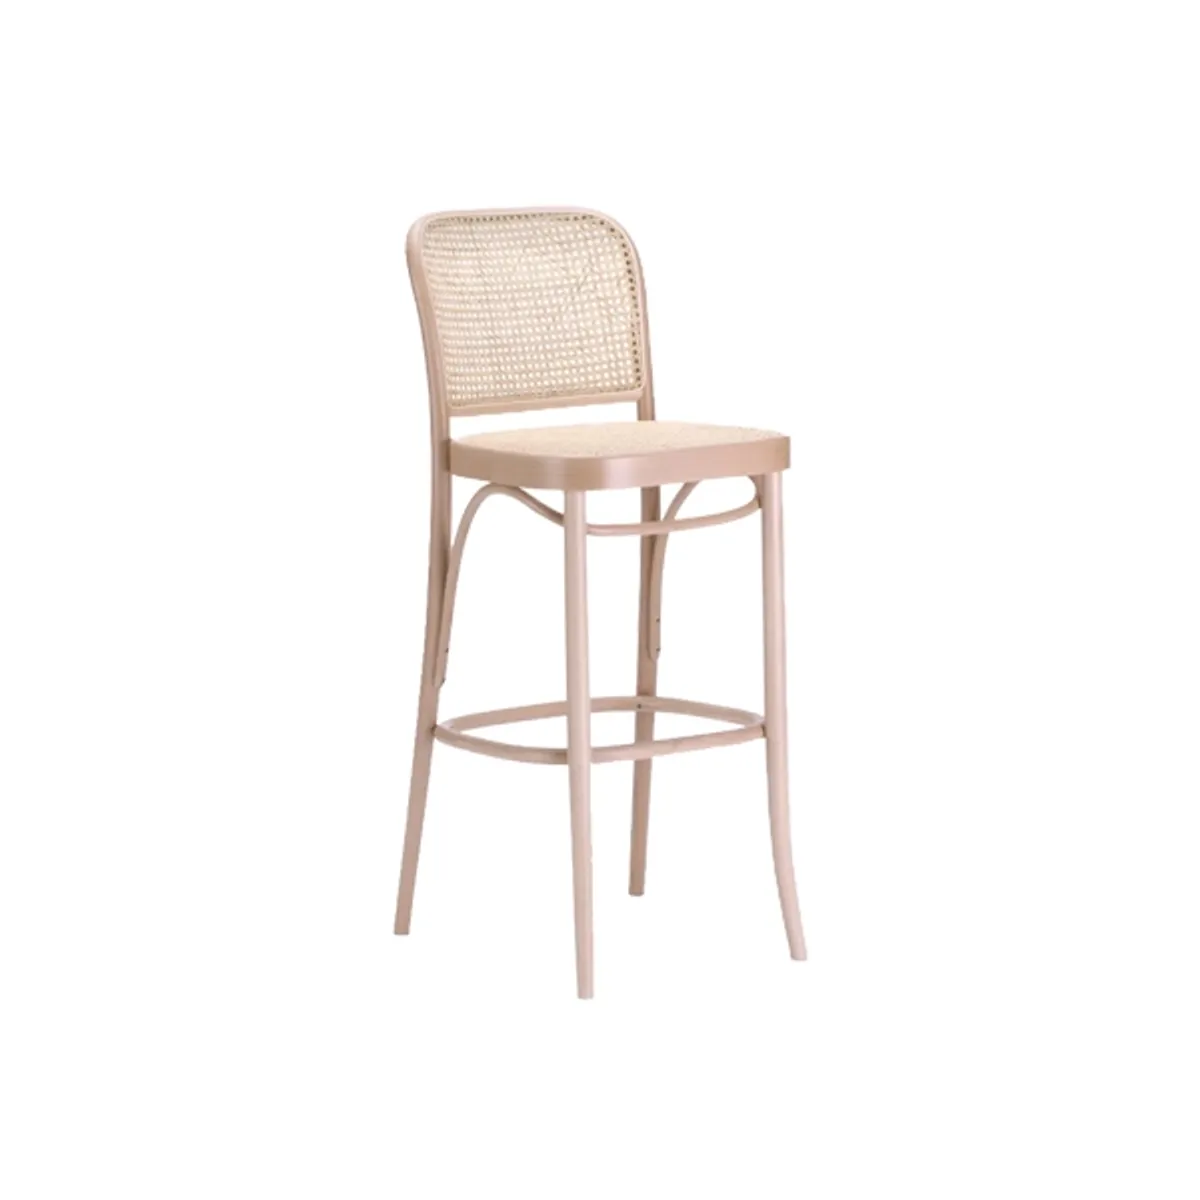 Bombay woven bar stool Inside Out Contracts